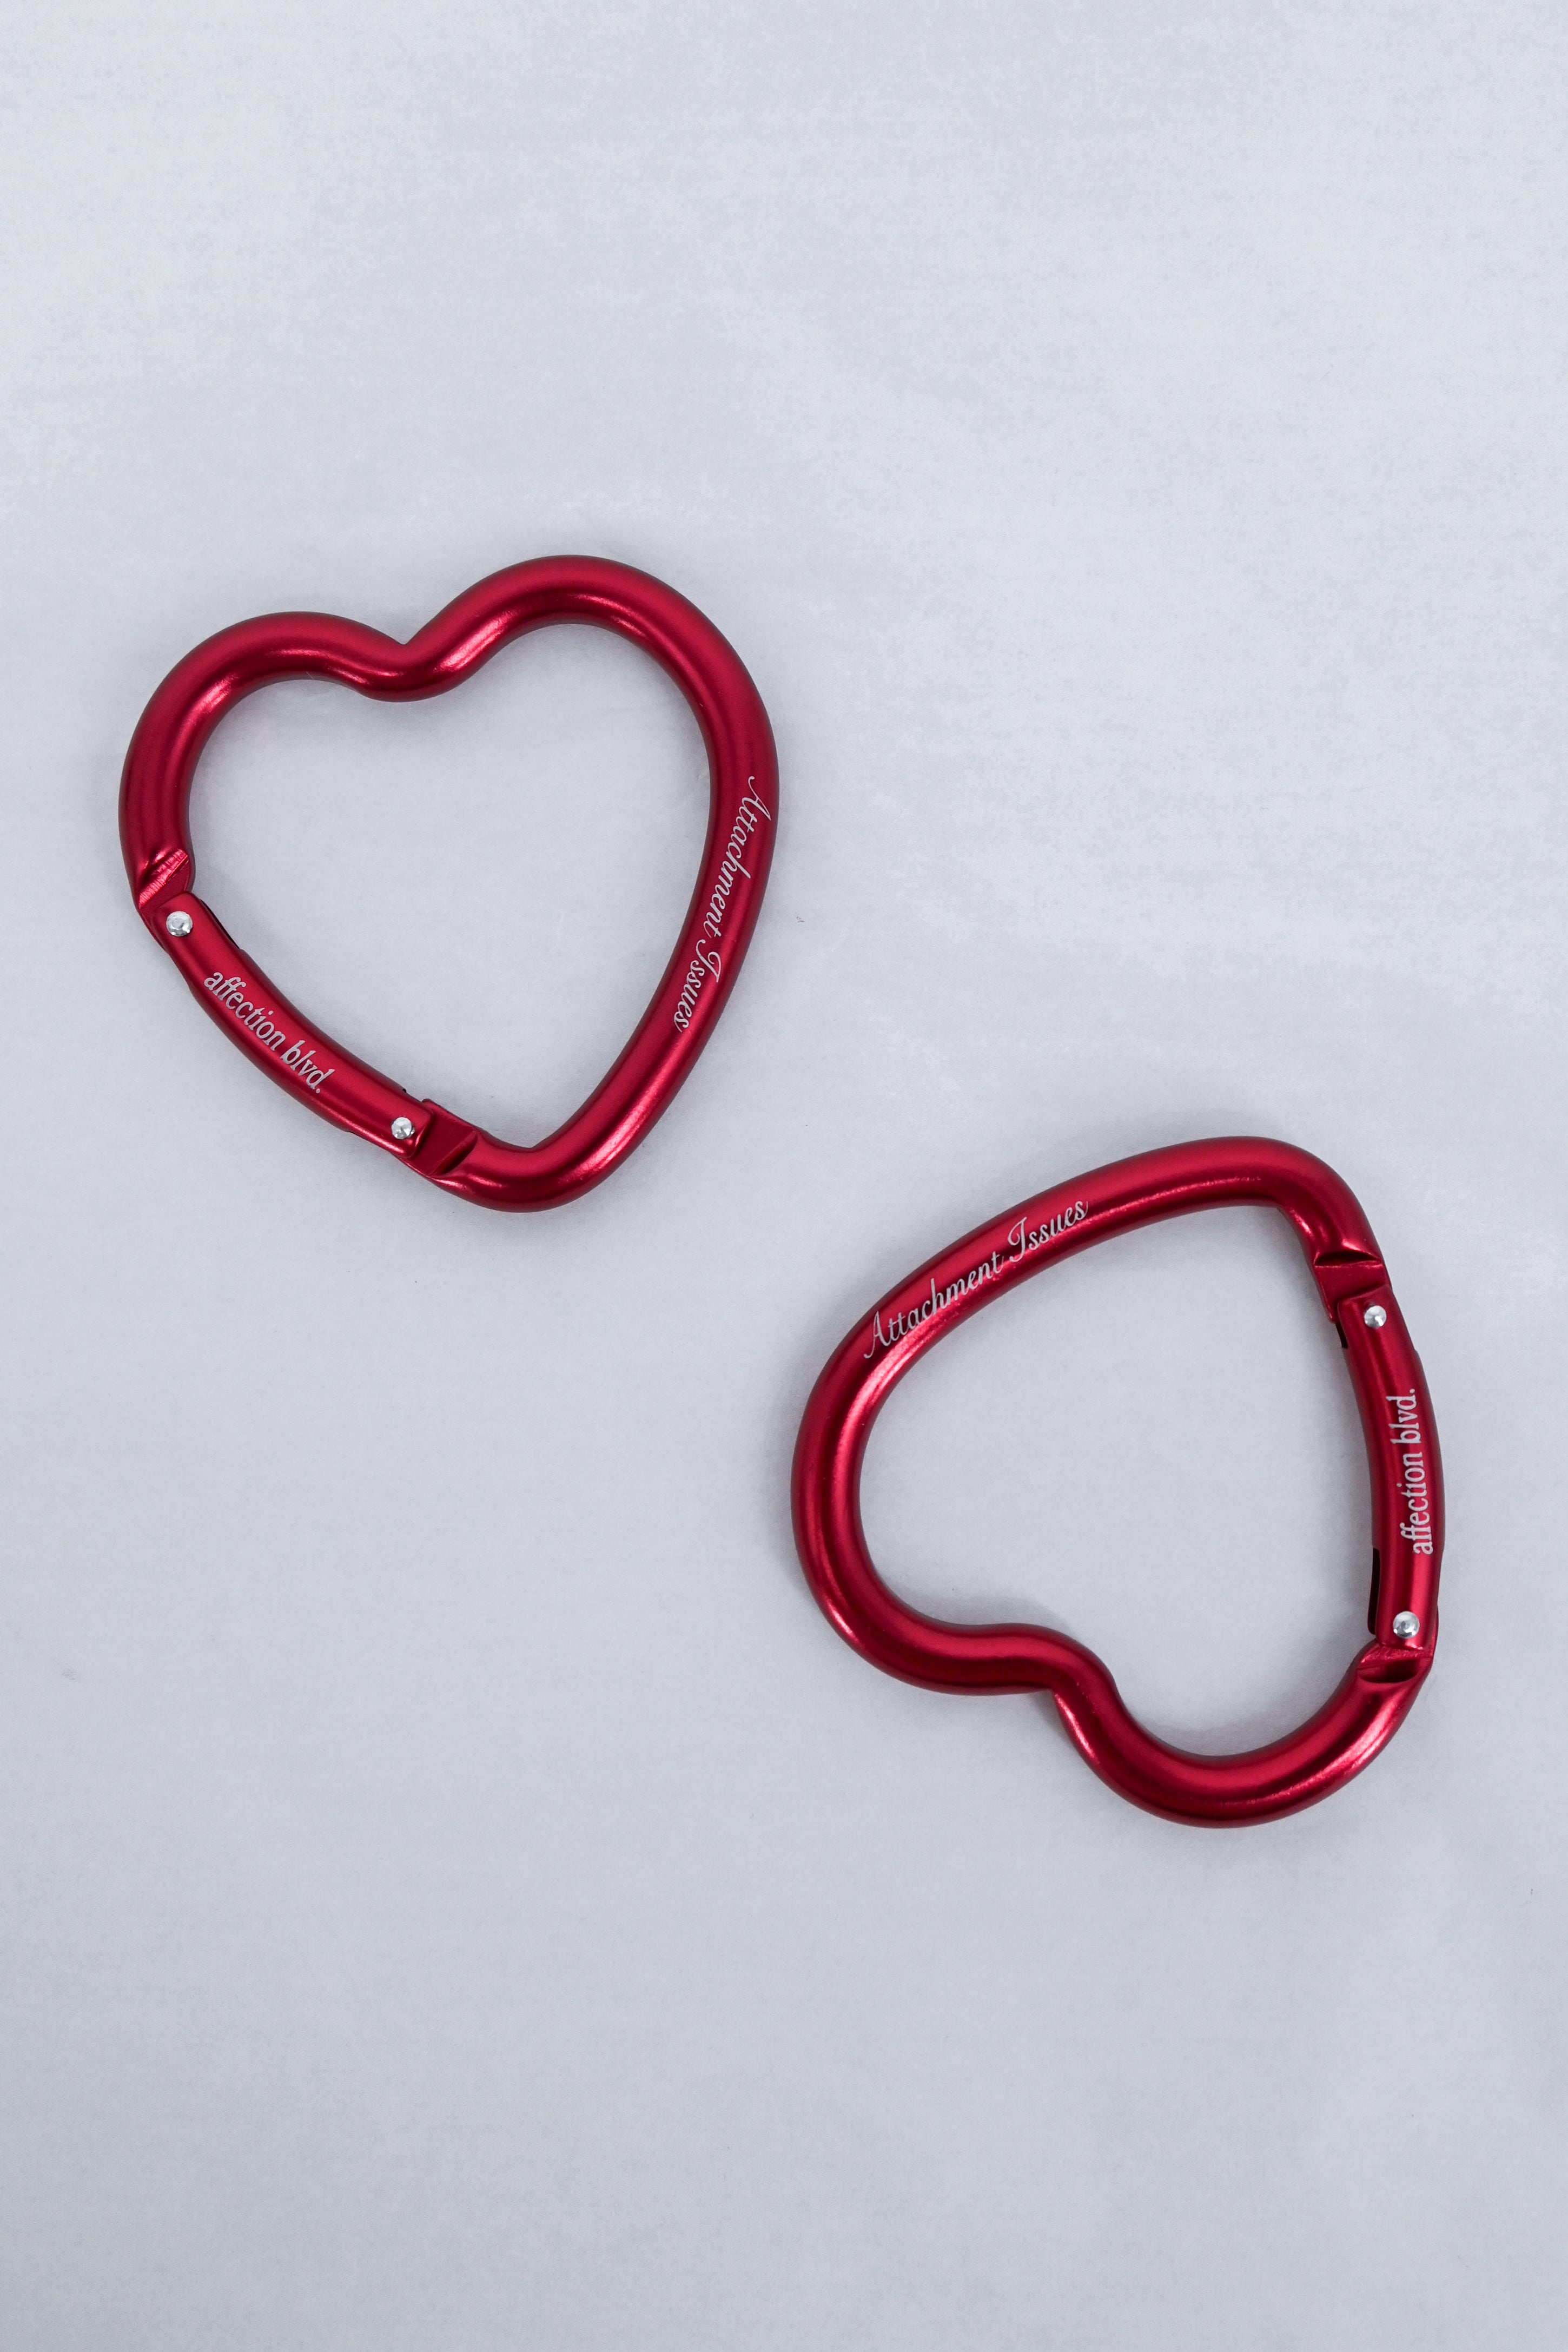 "Attachment Issues" Heart Carabiner